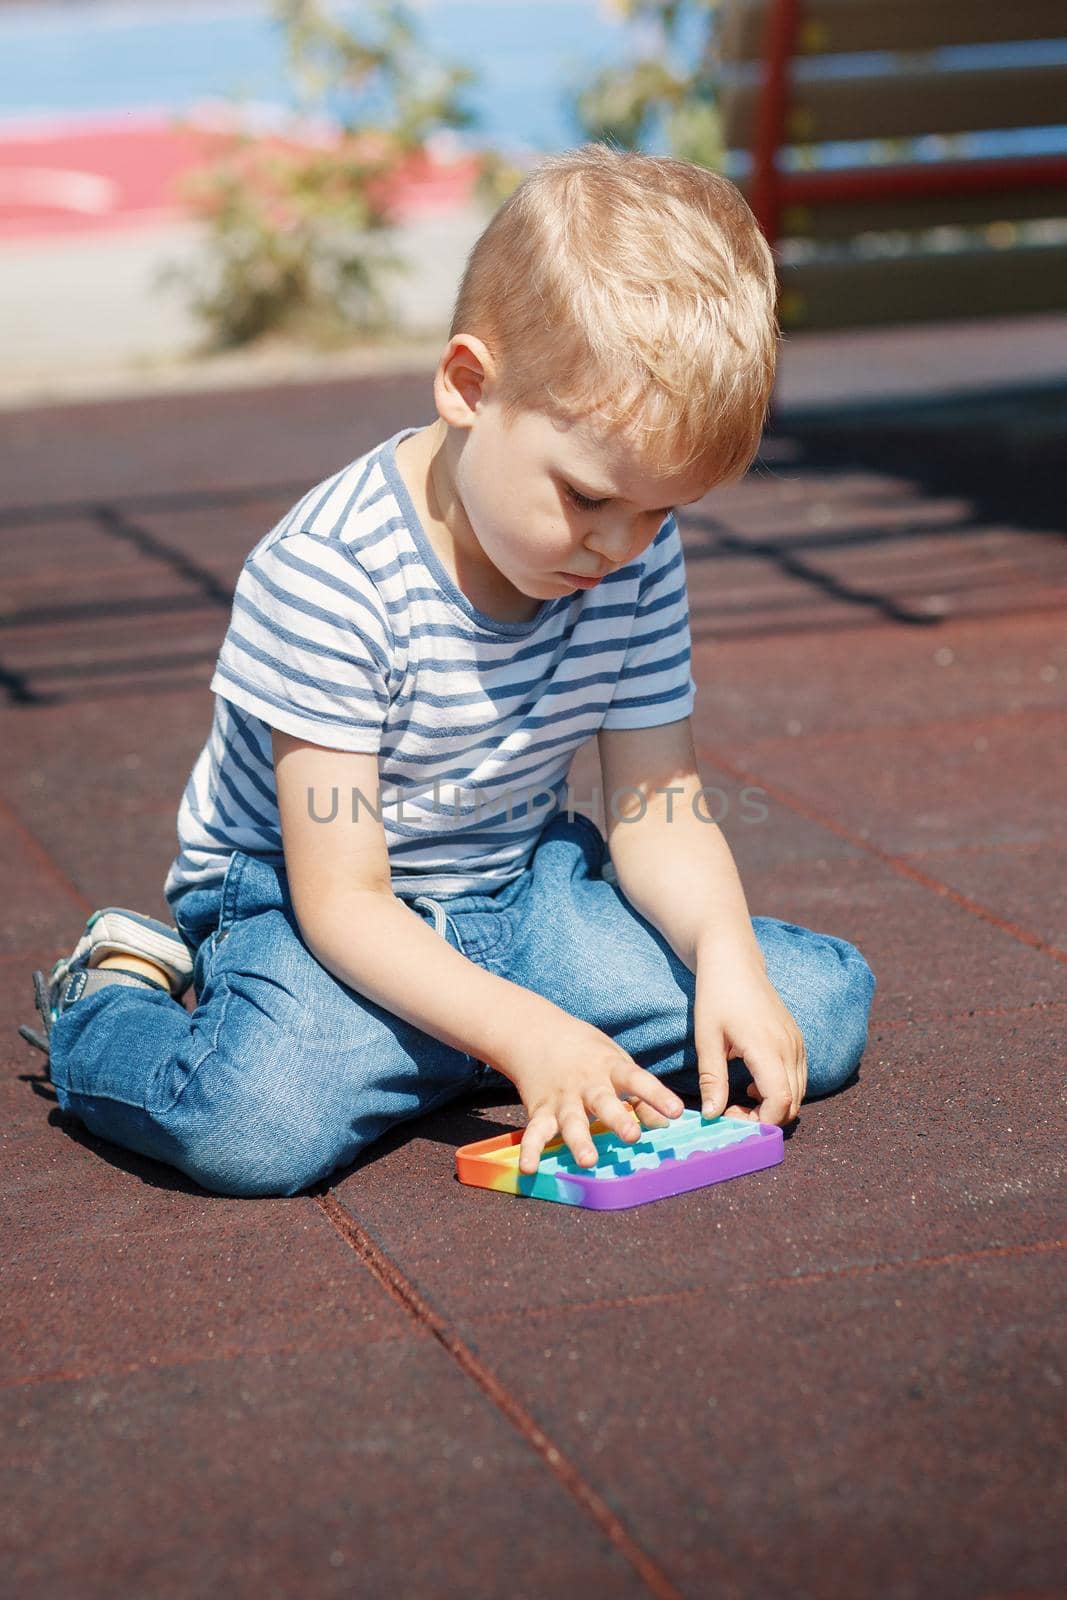 The child kneels on the floor of the playground and plays with a colourful toy for relaxation.